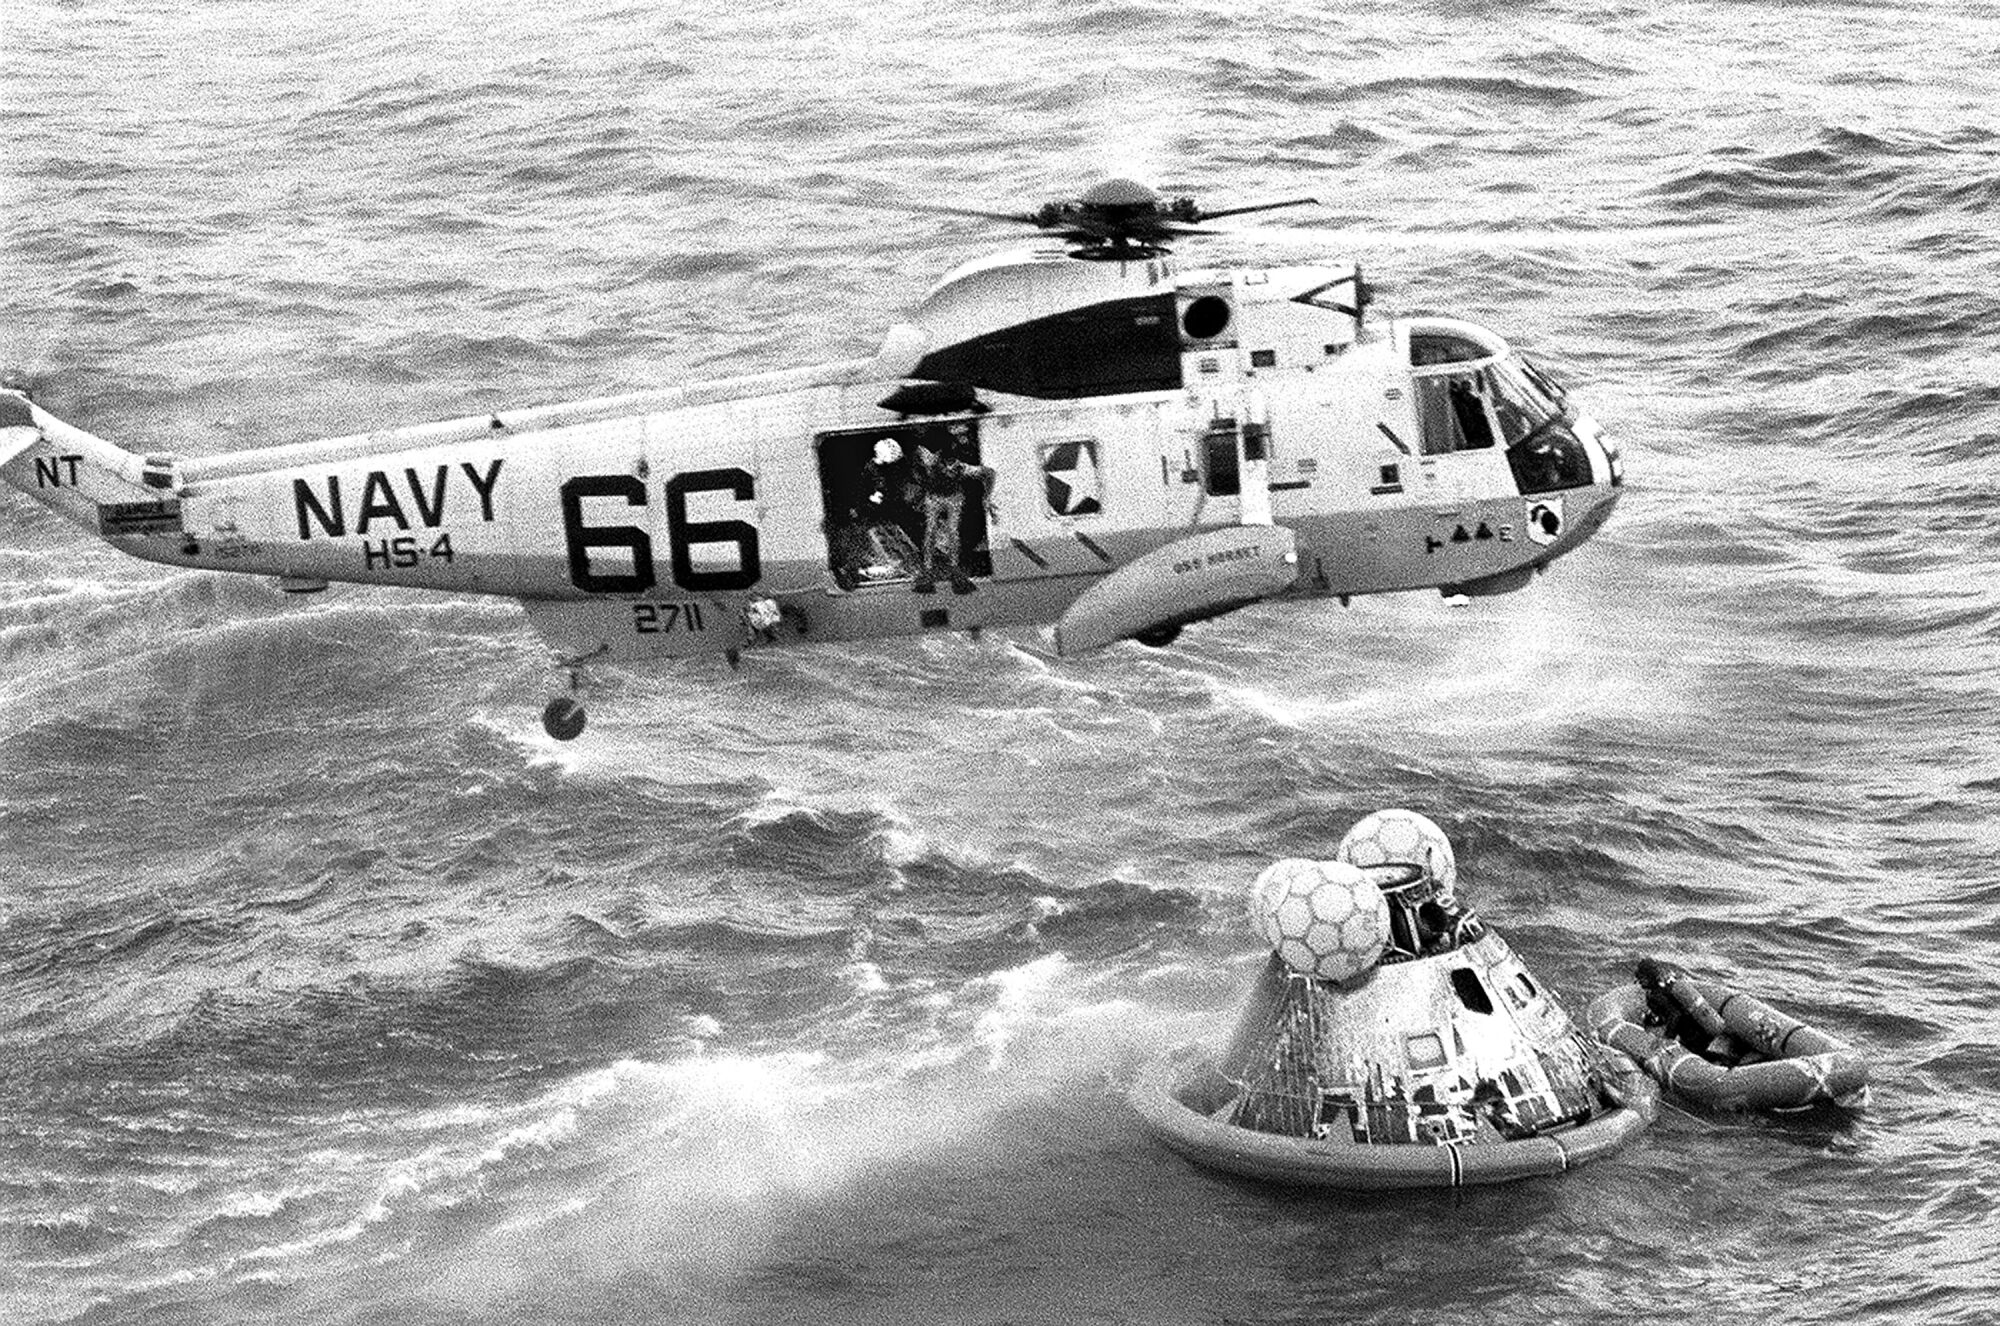 A helicopter hovers over the Apollo 11 capsule 